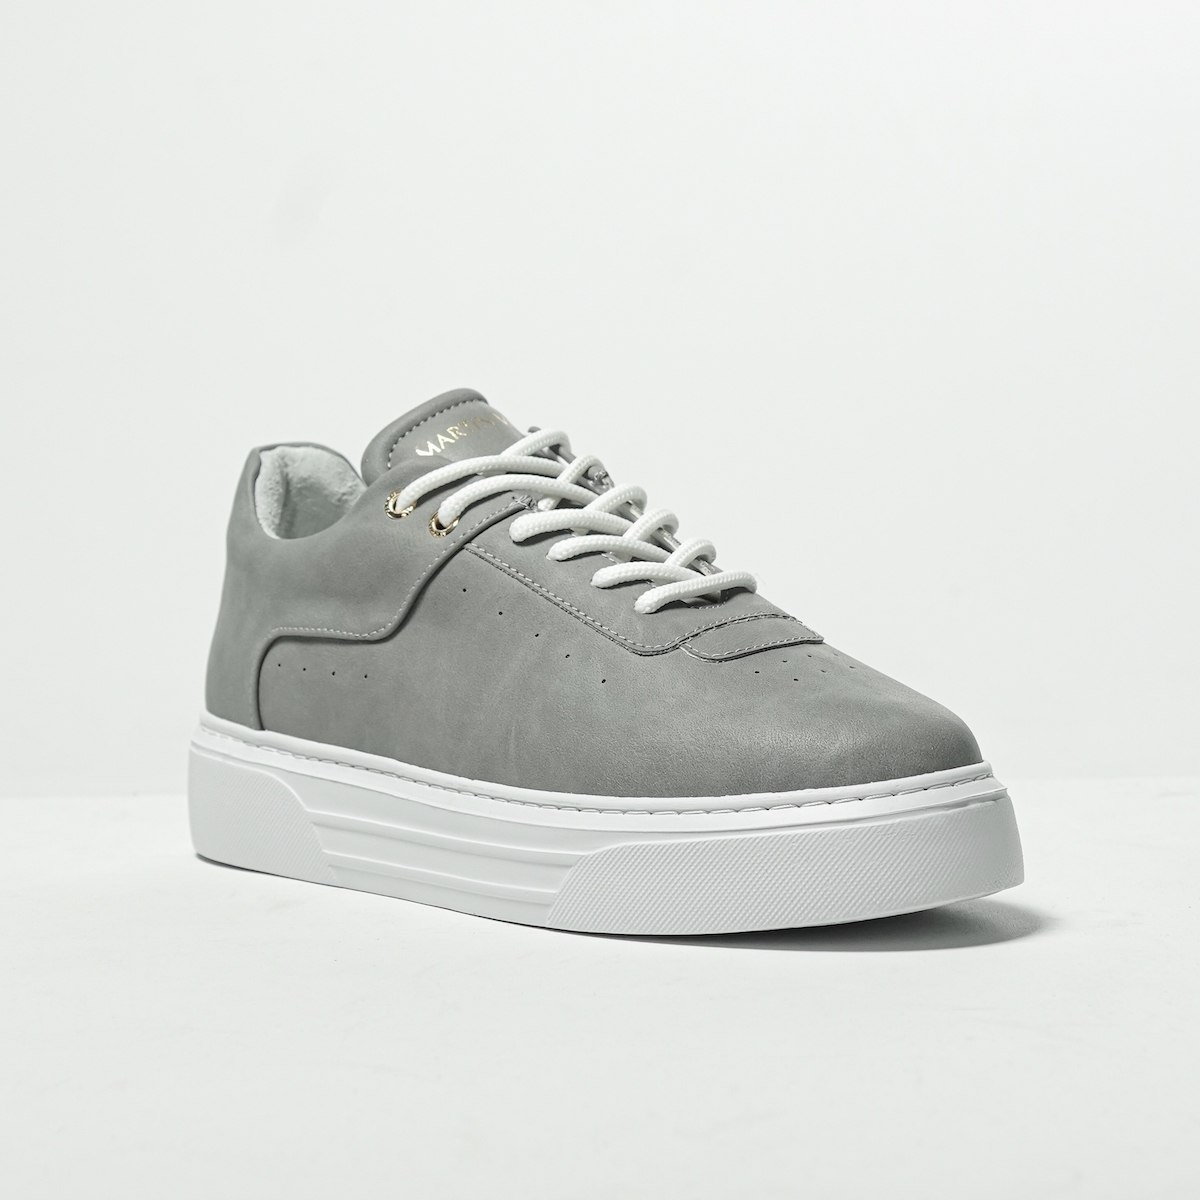 Men’s Casual Sneakers Breathable Shoes Gray | Martin Valen